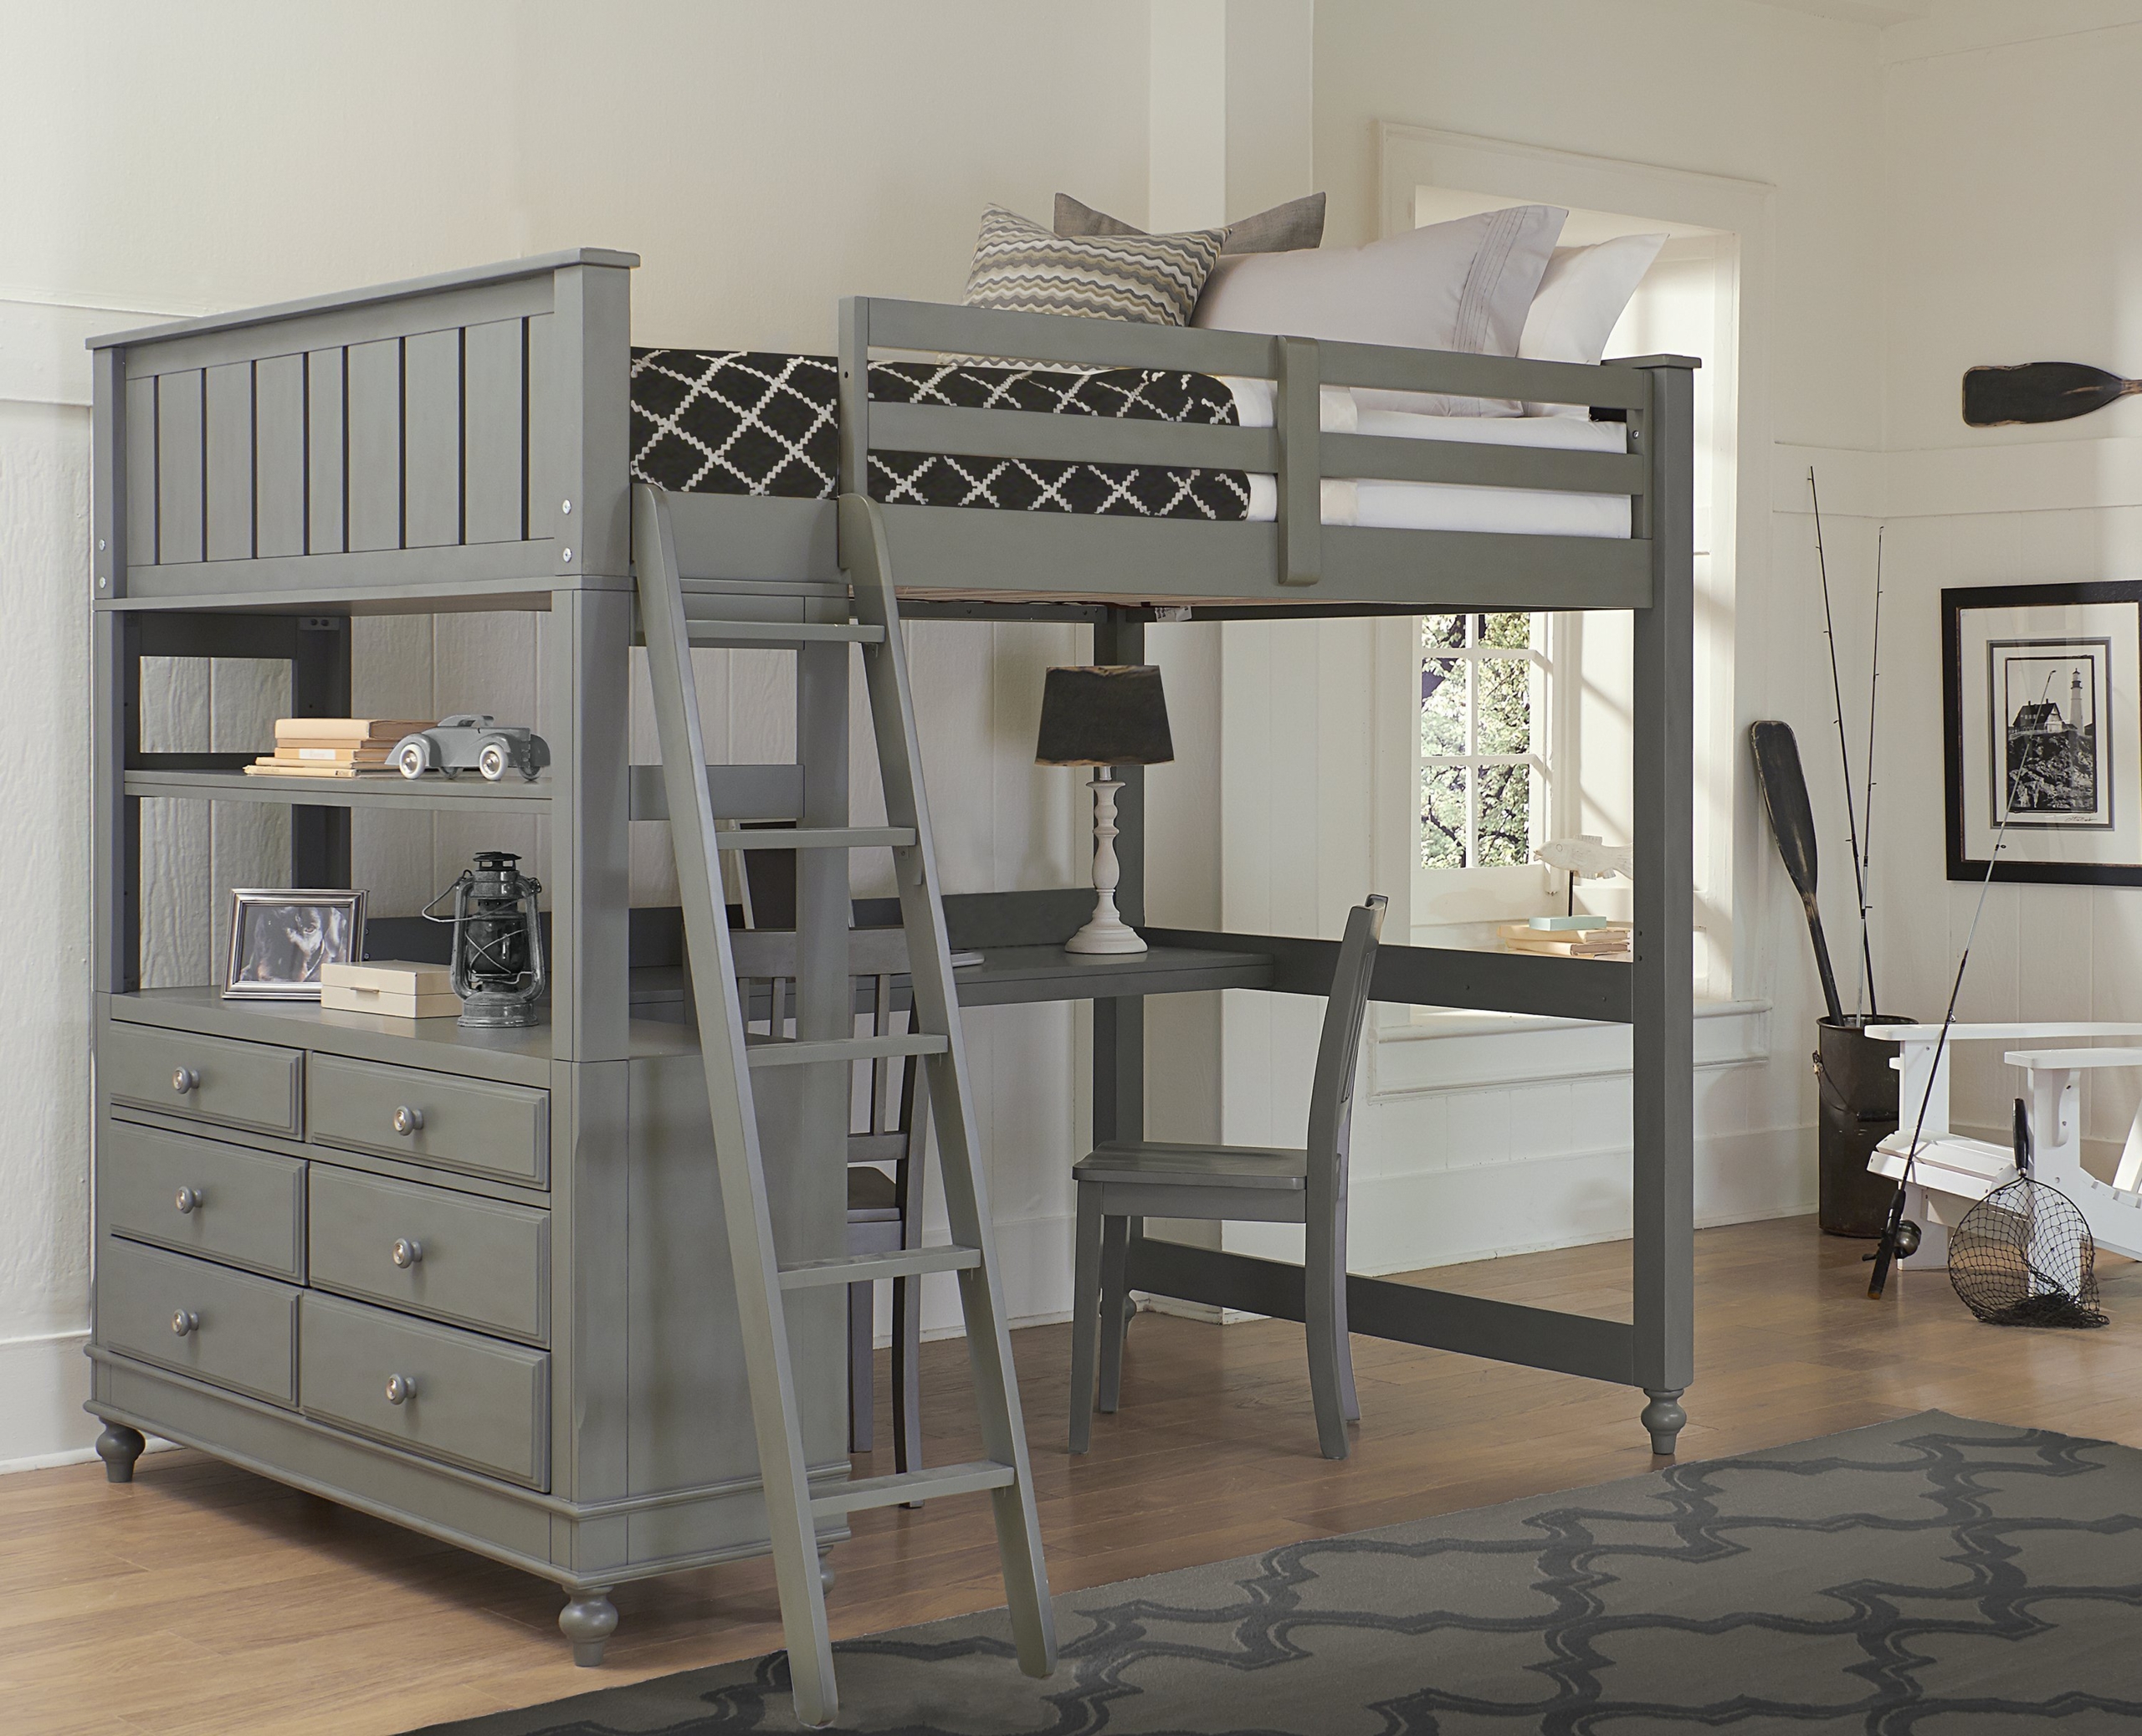 Bunk Beds With Dressers Visualhunt, Bunk Bed Desk Combination